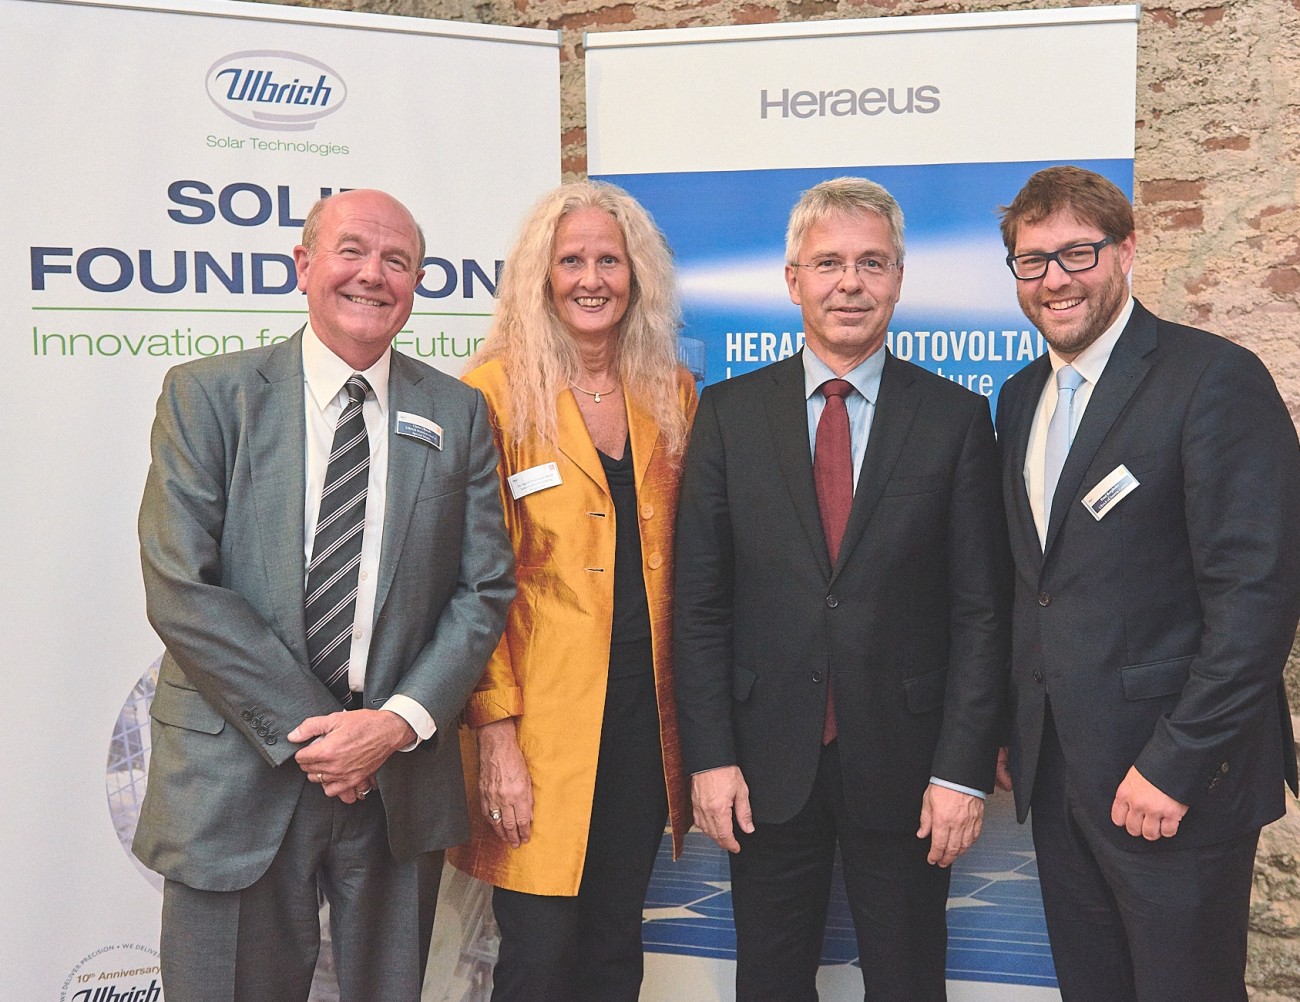 Dr. Andre Kobelt, the Chief Commercial & Technology Officer for Heraeus: "We view this agreement as an exciting opportunity for Heraeus to embark upon as we look to continue to expand our global footprint in the field of renewable energies."